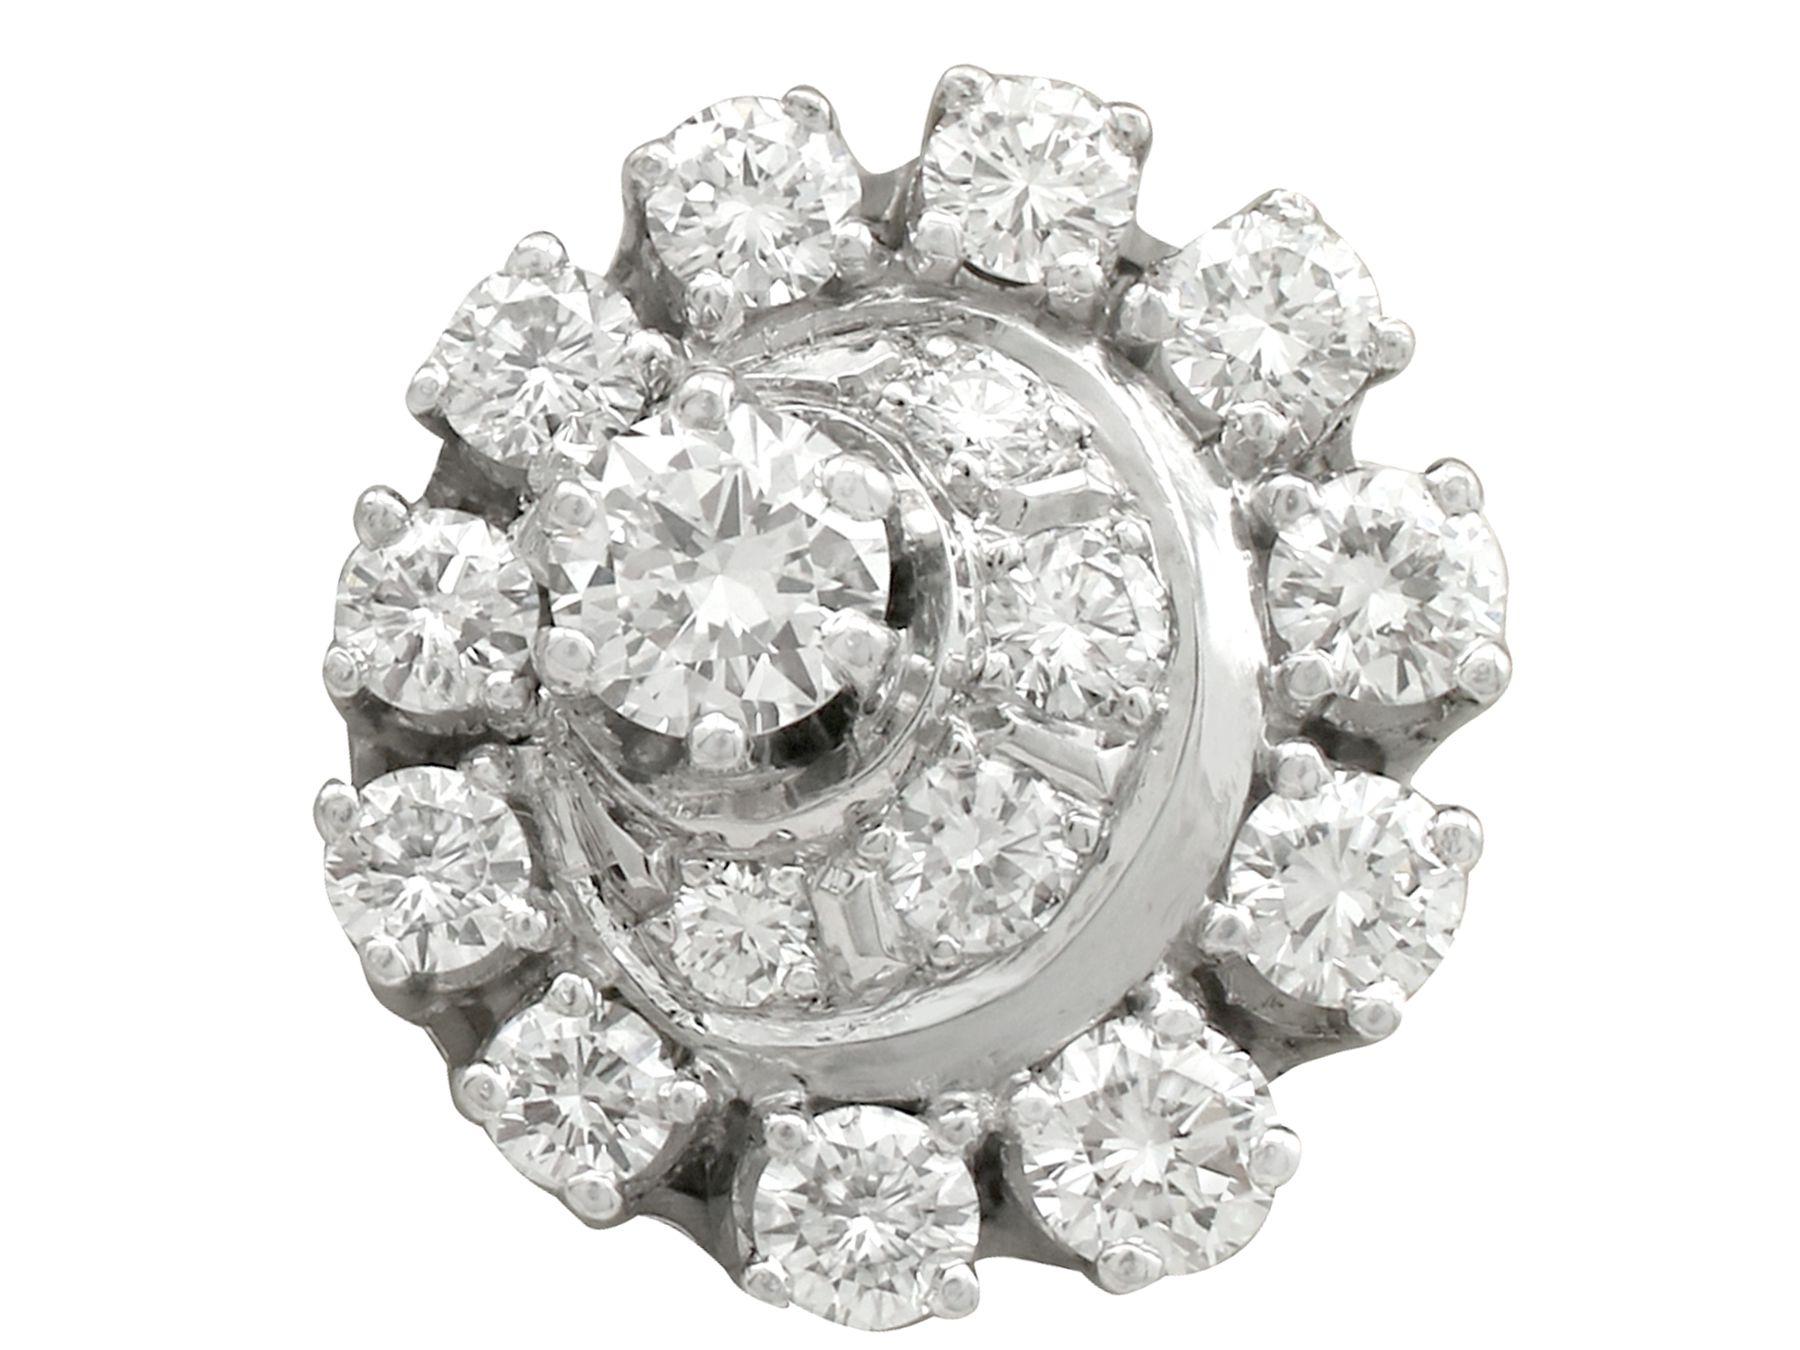 A stunning pair of 3.05 carat diamond and 18 karat white gold, platinum set cluster style stud earrings; part of our diverse antique jewelry and estate jewelry collections.

These stunning, fine and impressive vintage diamond cluster earrings have